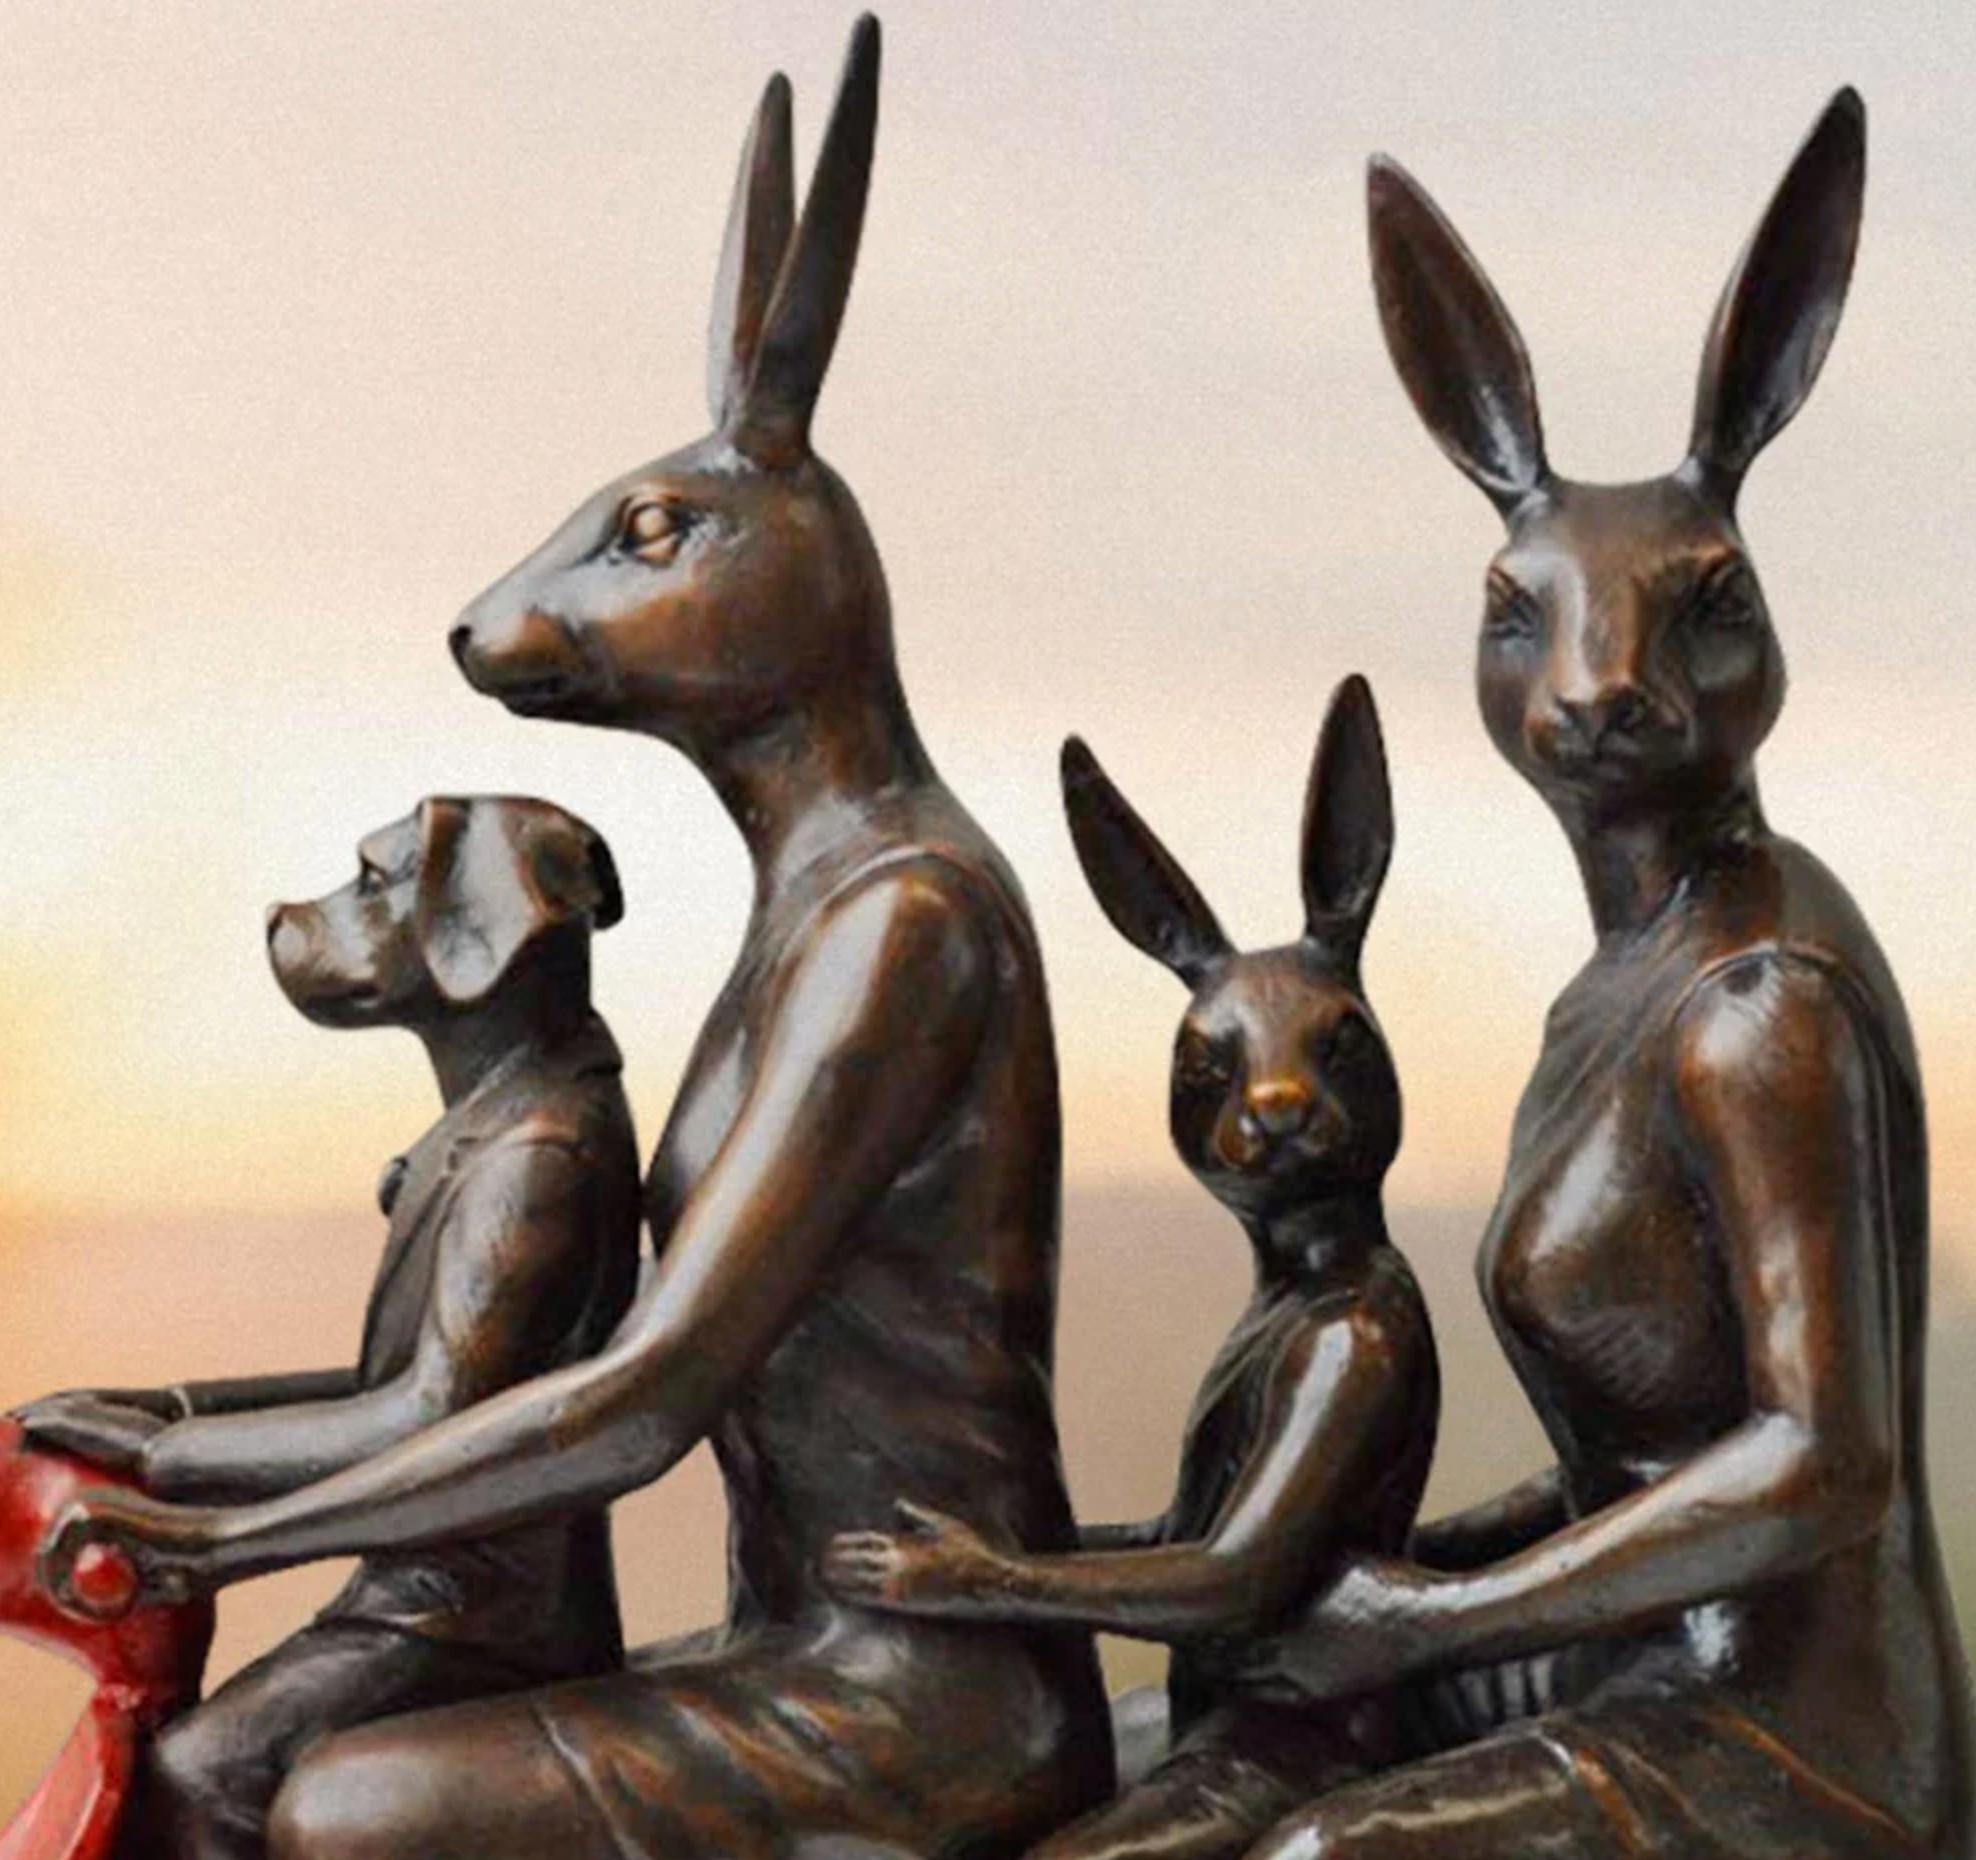 Title: It was a big beautiful family
Authentic bronze sculpture with Red Patina

This authentic bronze sculpture titled 'It was a big beautiful family' by artists Gillie and Marc has been meticulously crafted in bronze with red patina. It features a